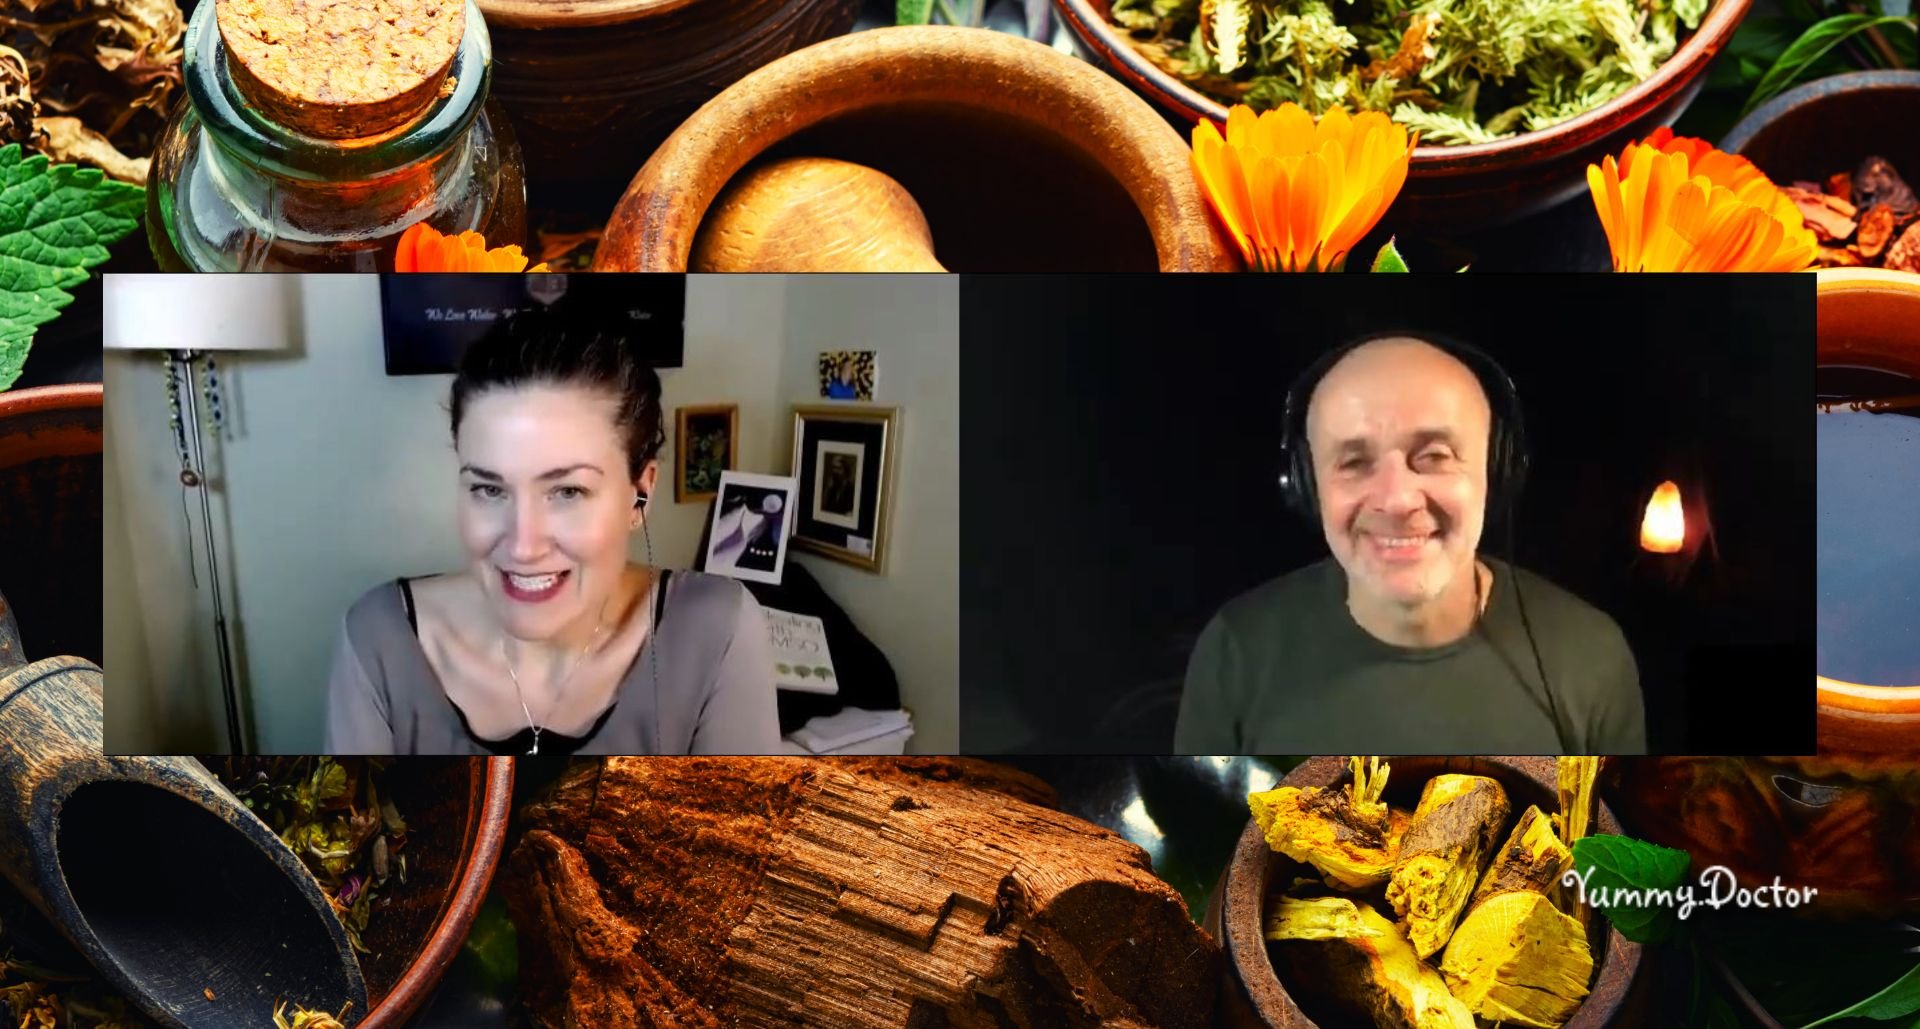 Plant Remedies and Natural Healing with Amandha Vollmer (ADV) and Adrian of the For The Love of Truth Podcast